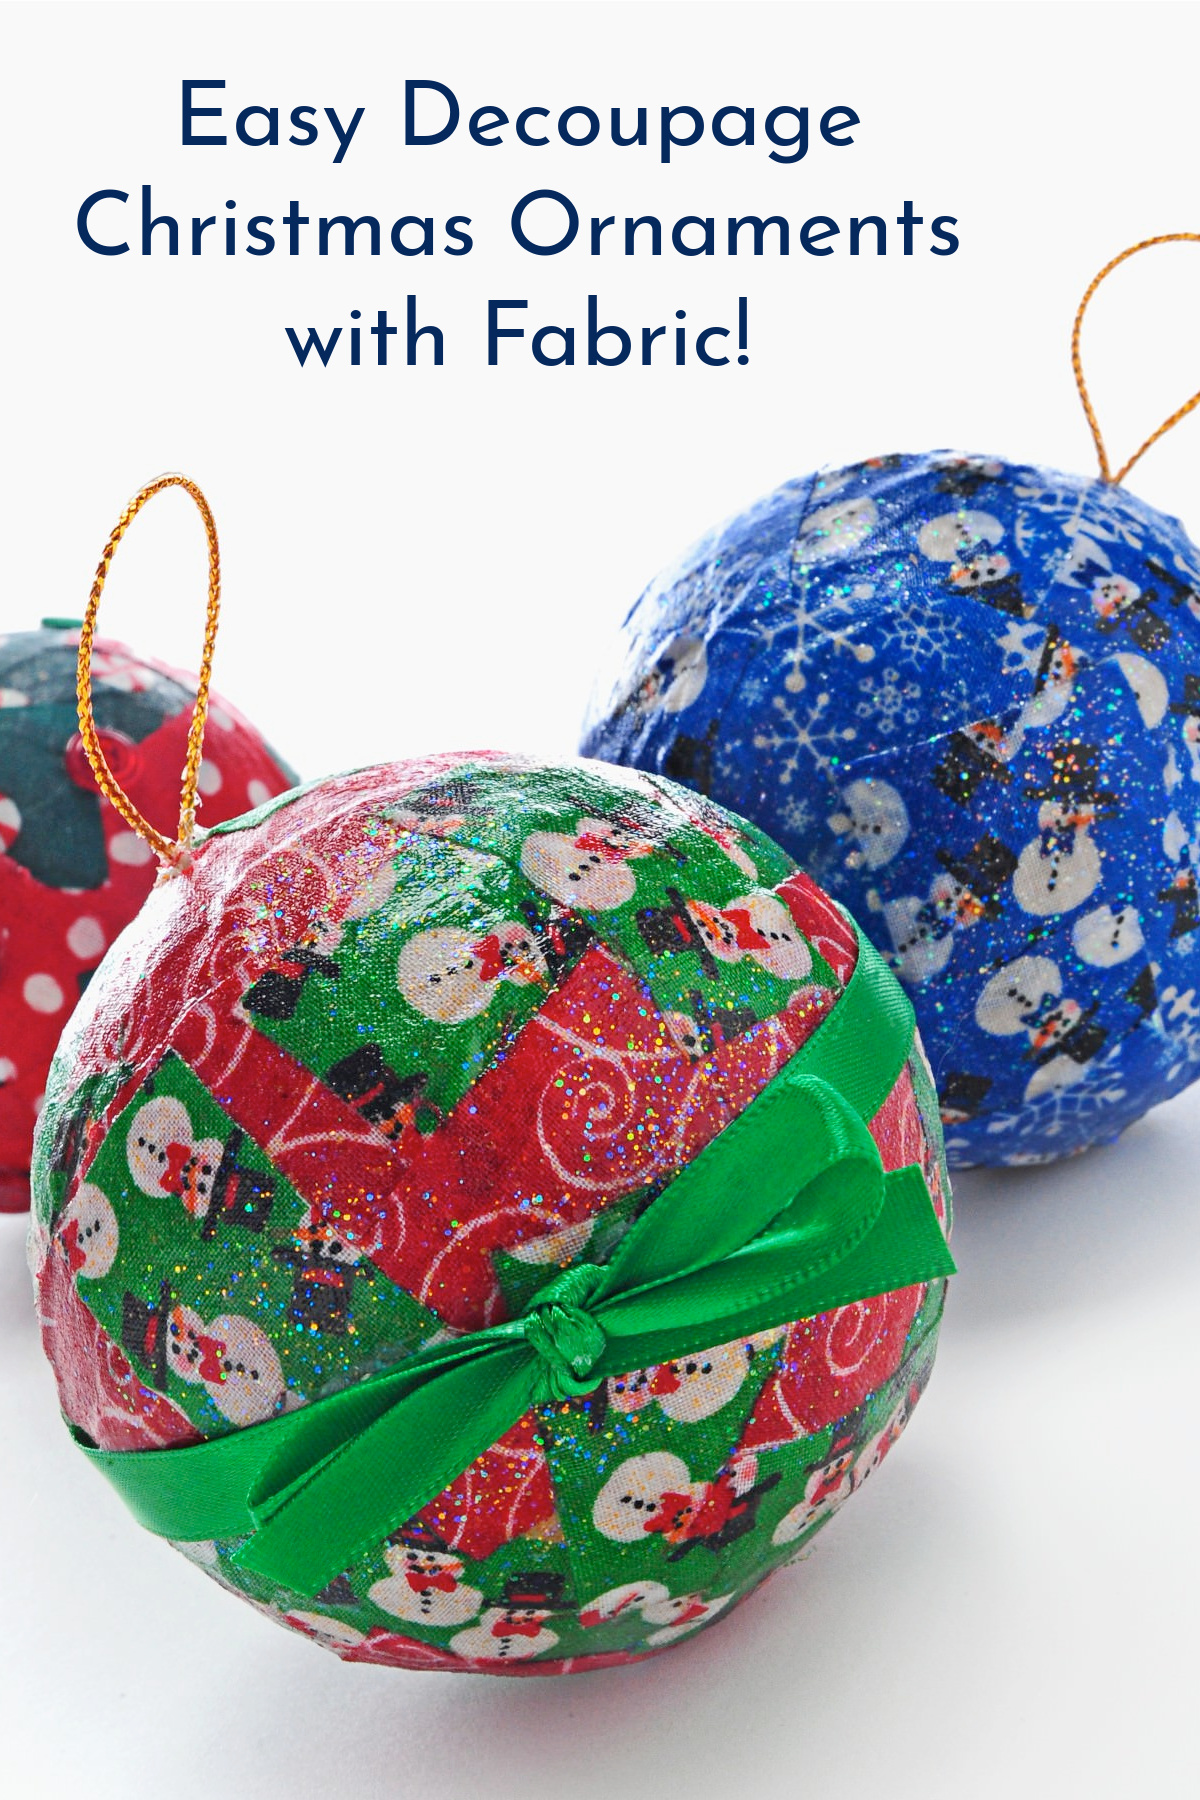 Easy Decoupage Christmas Ornaments with Fabric!